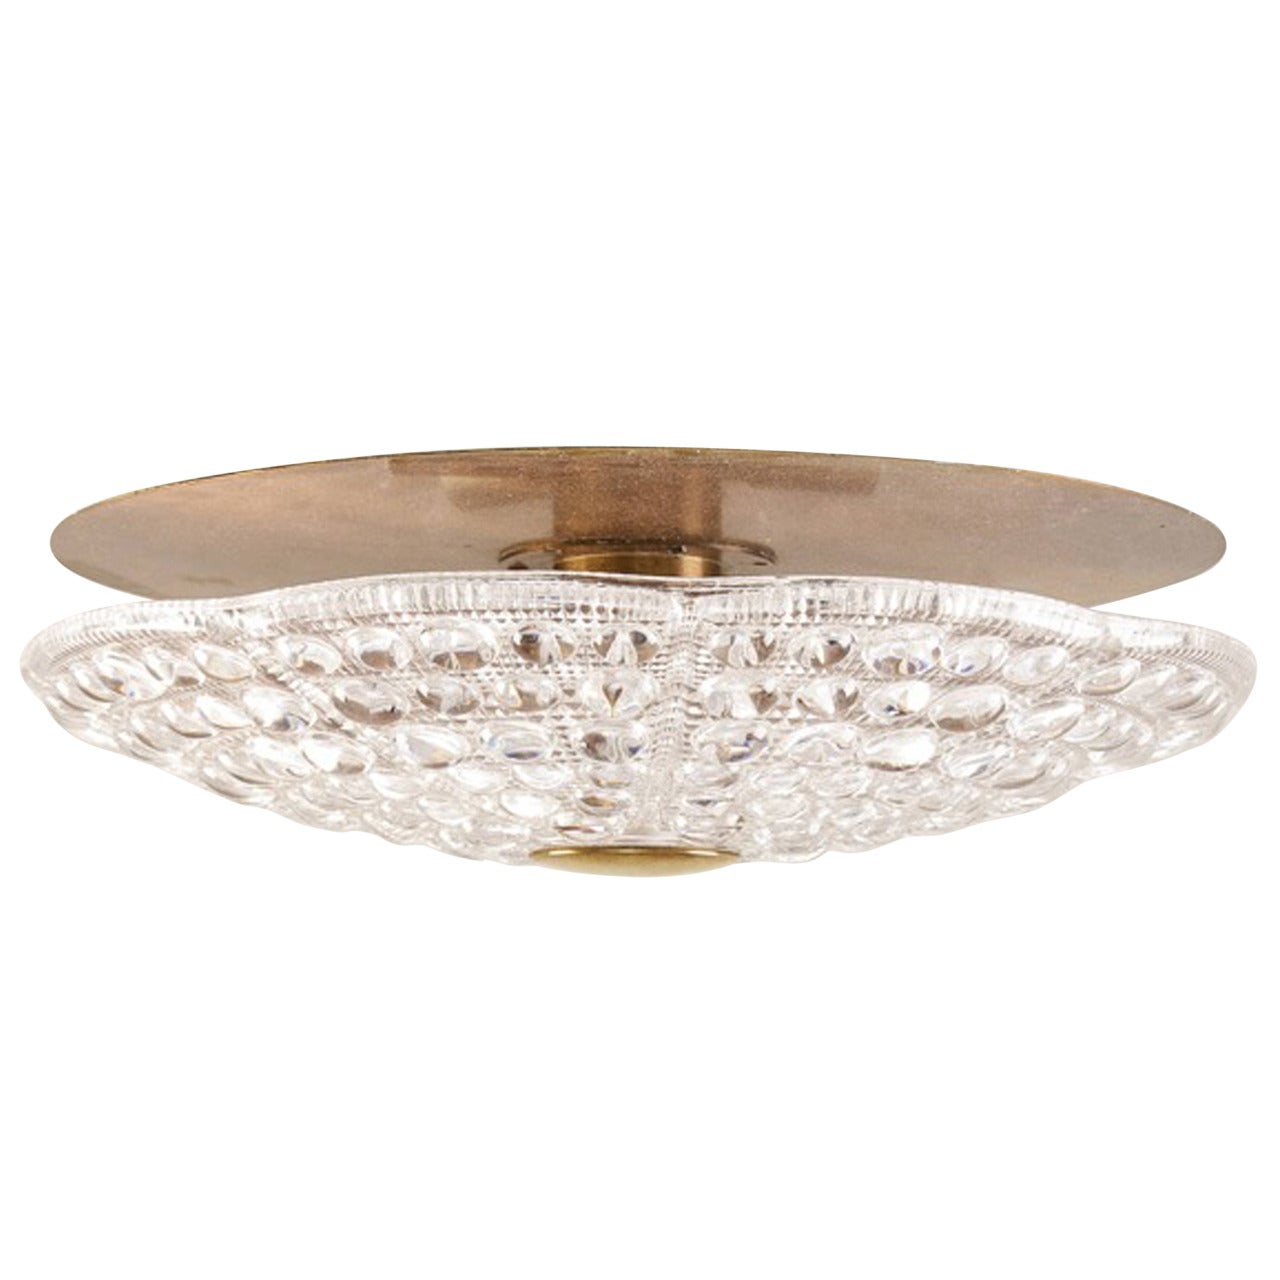 Pressed Glass and Brass Ceiling Light Fixture by Orrefors of Sweden